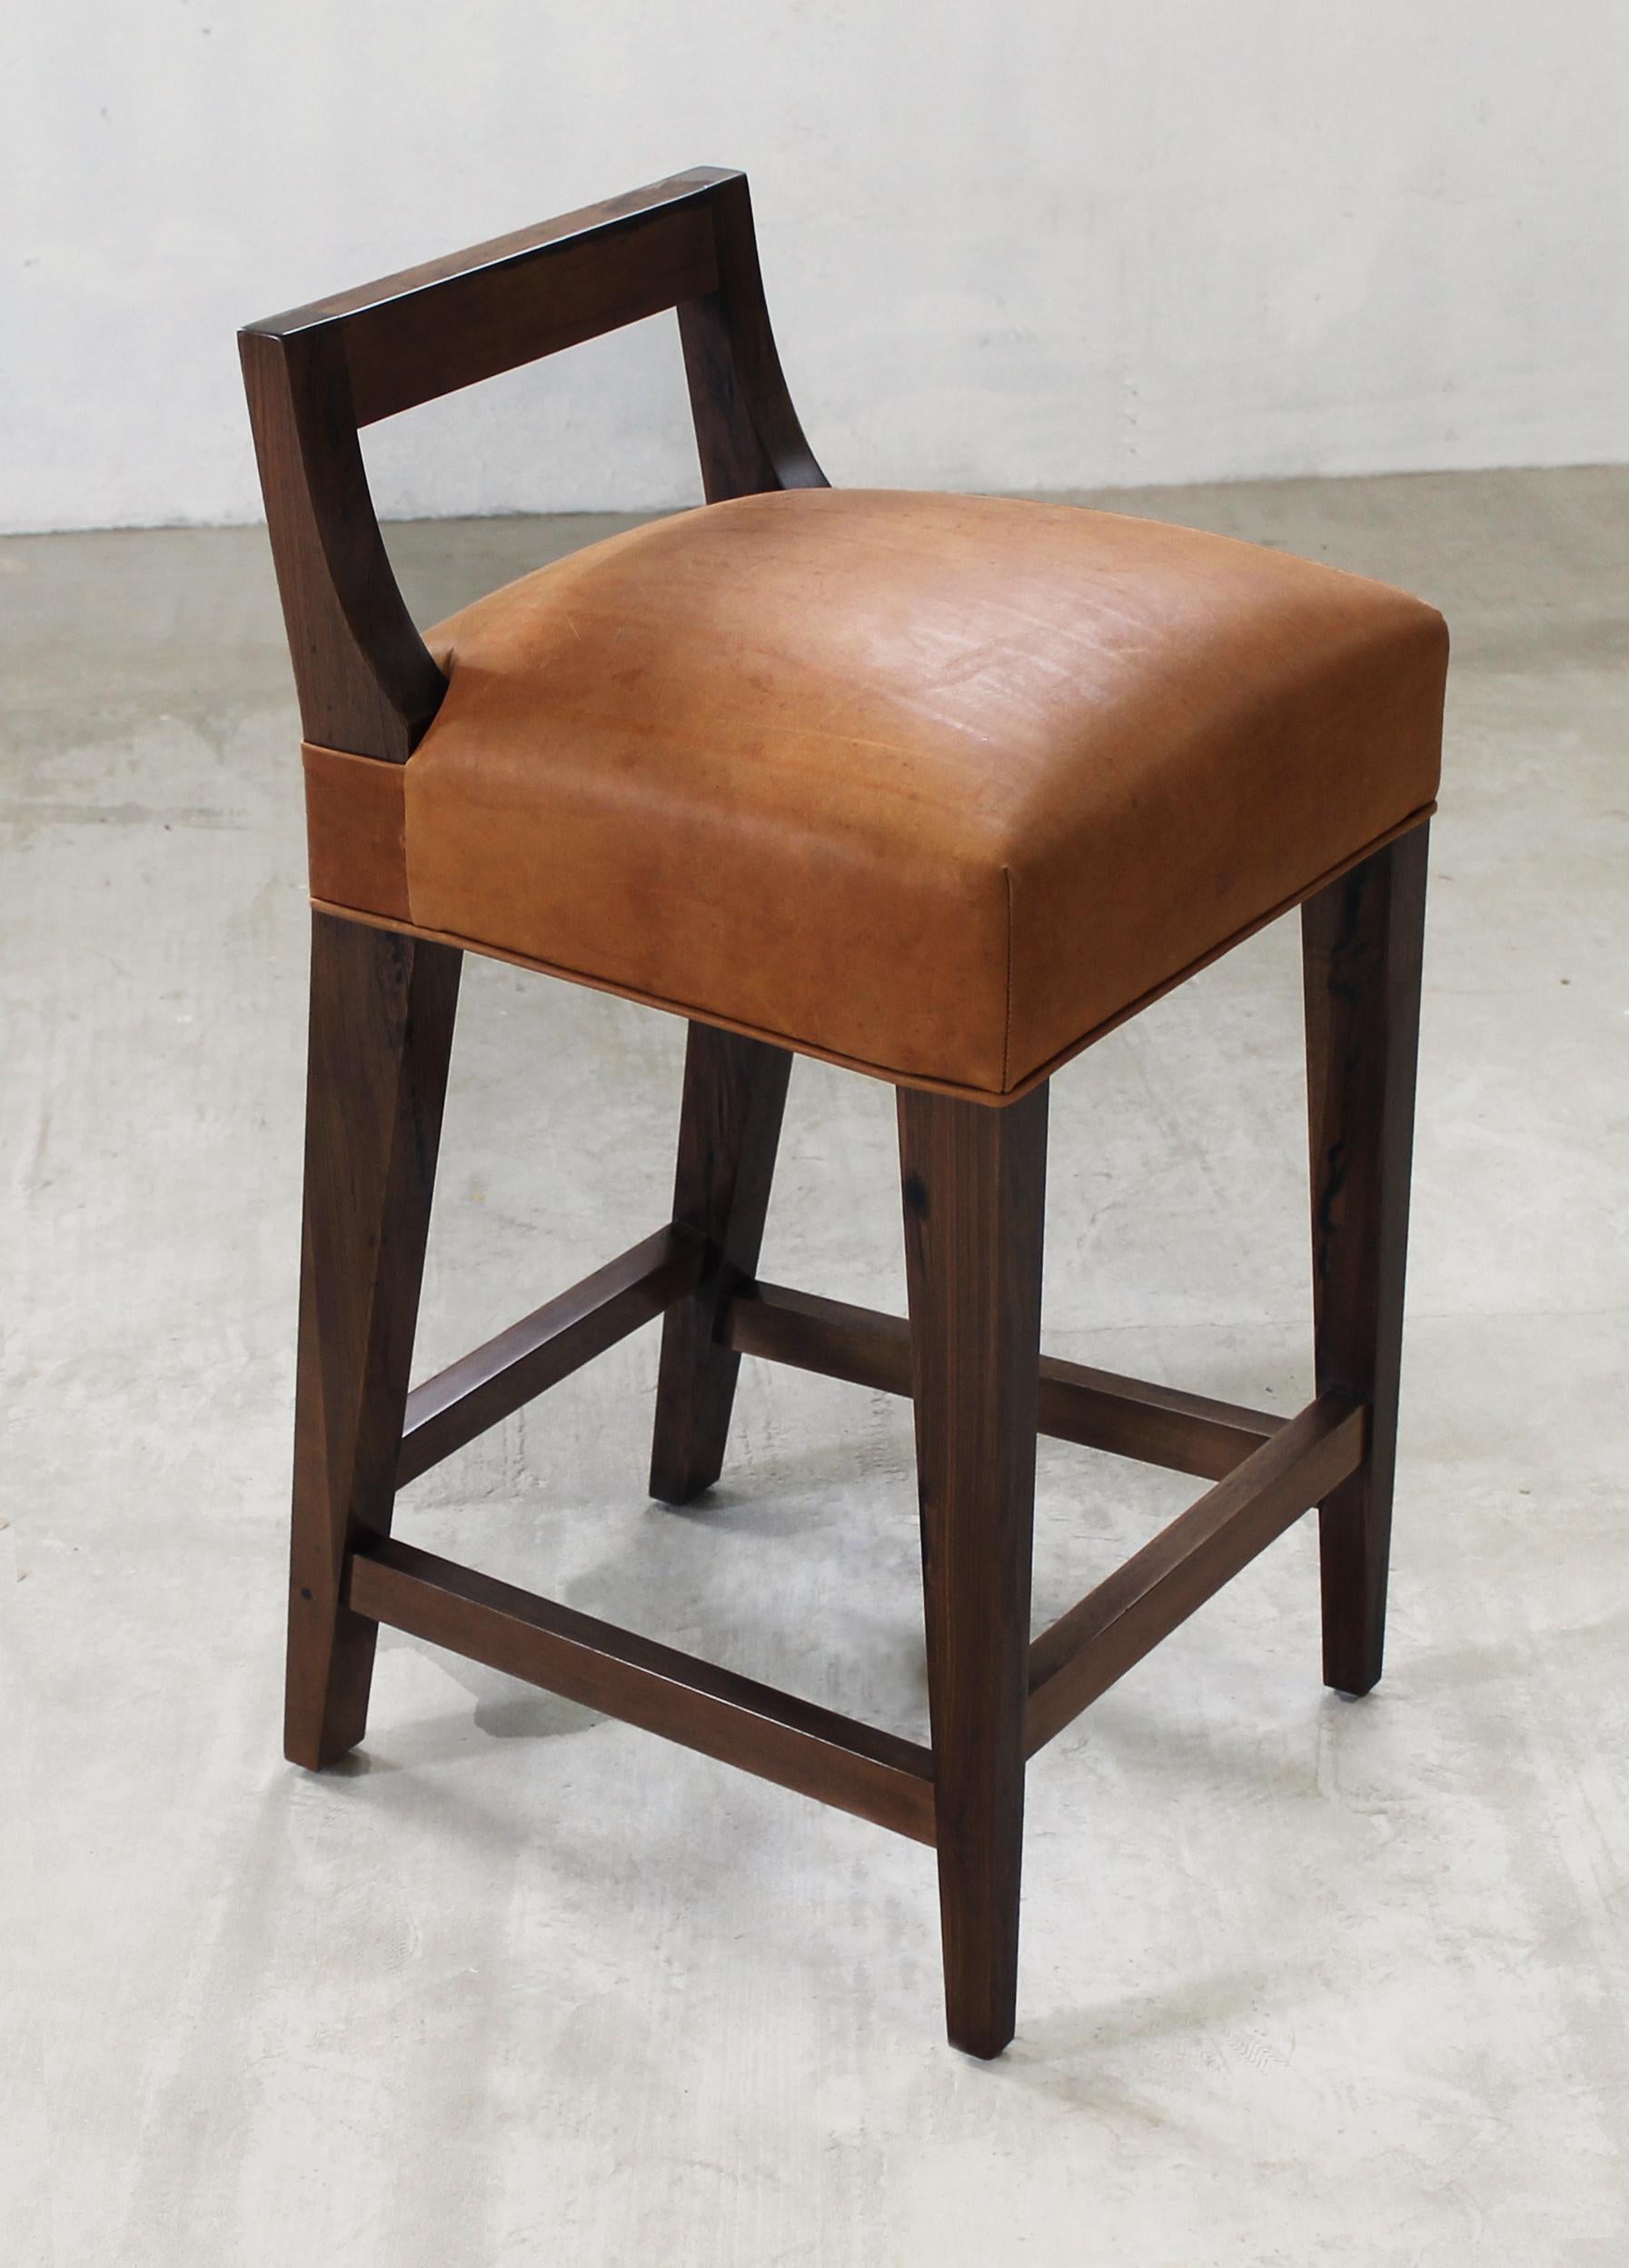 Argentine Exotic Wood Contemporary Stool in Leather from Costantini, Ecco For Sale